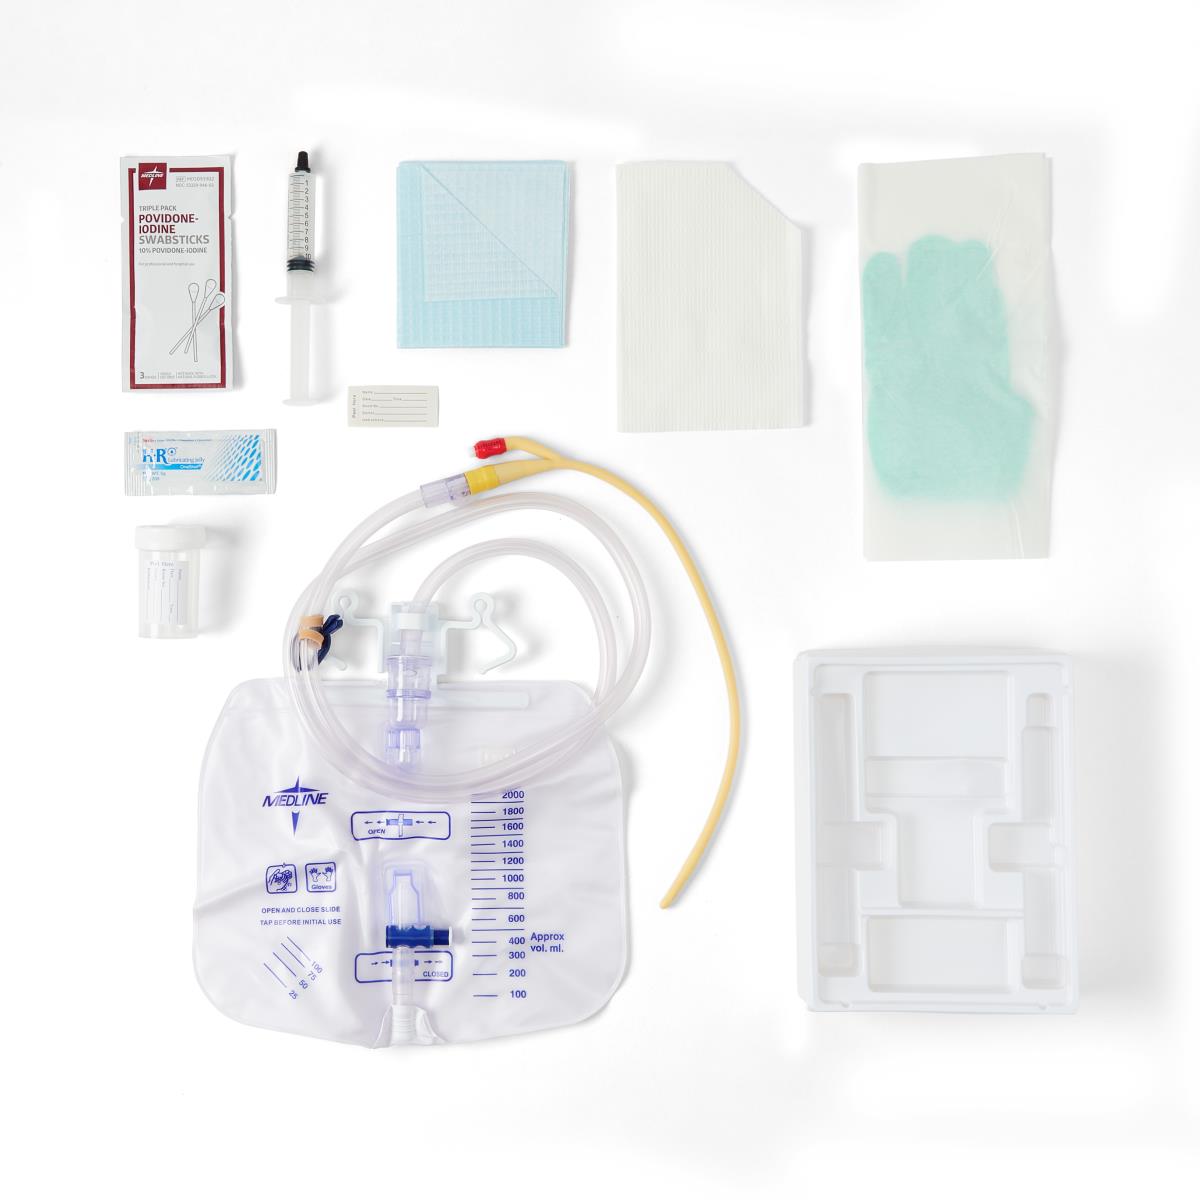 MedLine Urinary Drainage Bags with Anti-Reflux Tower or Valve